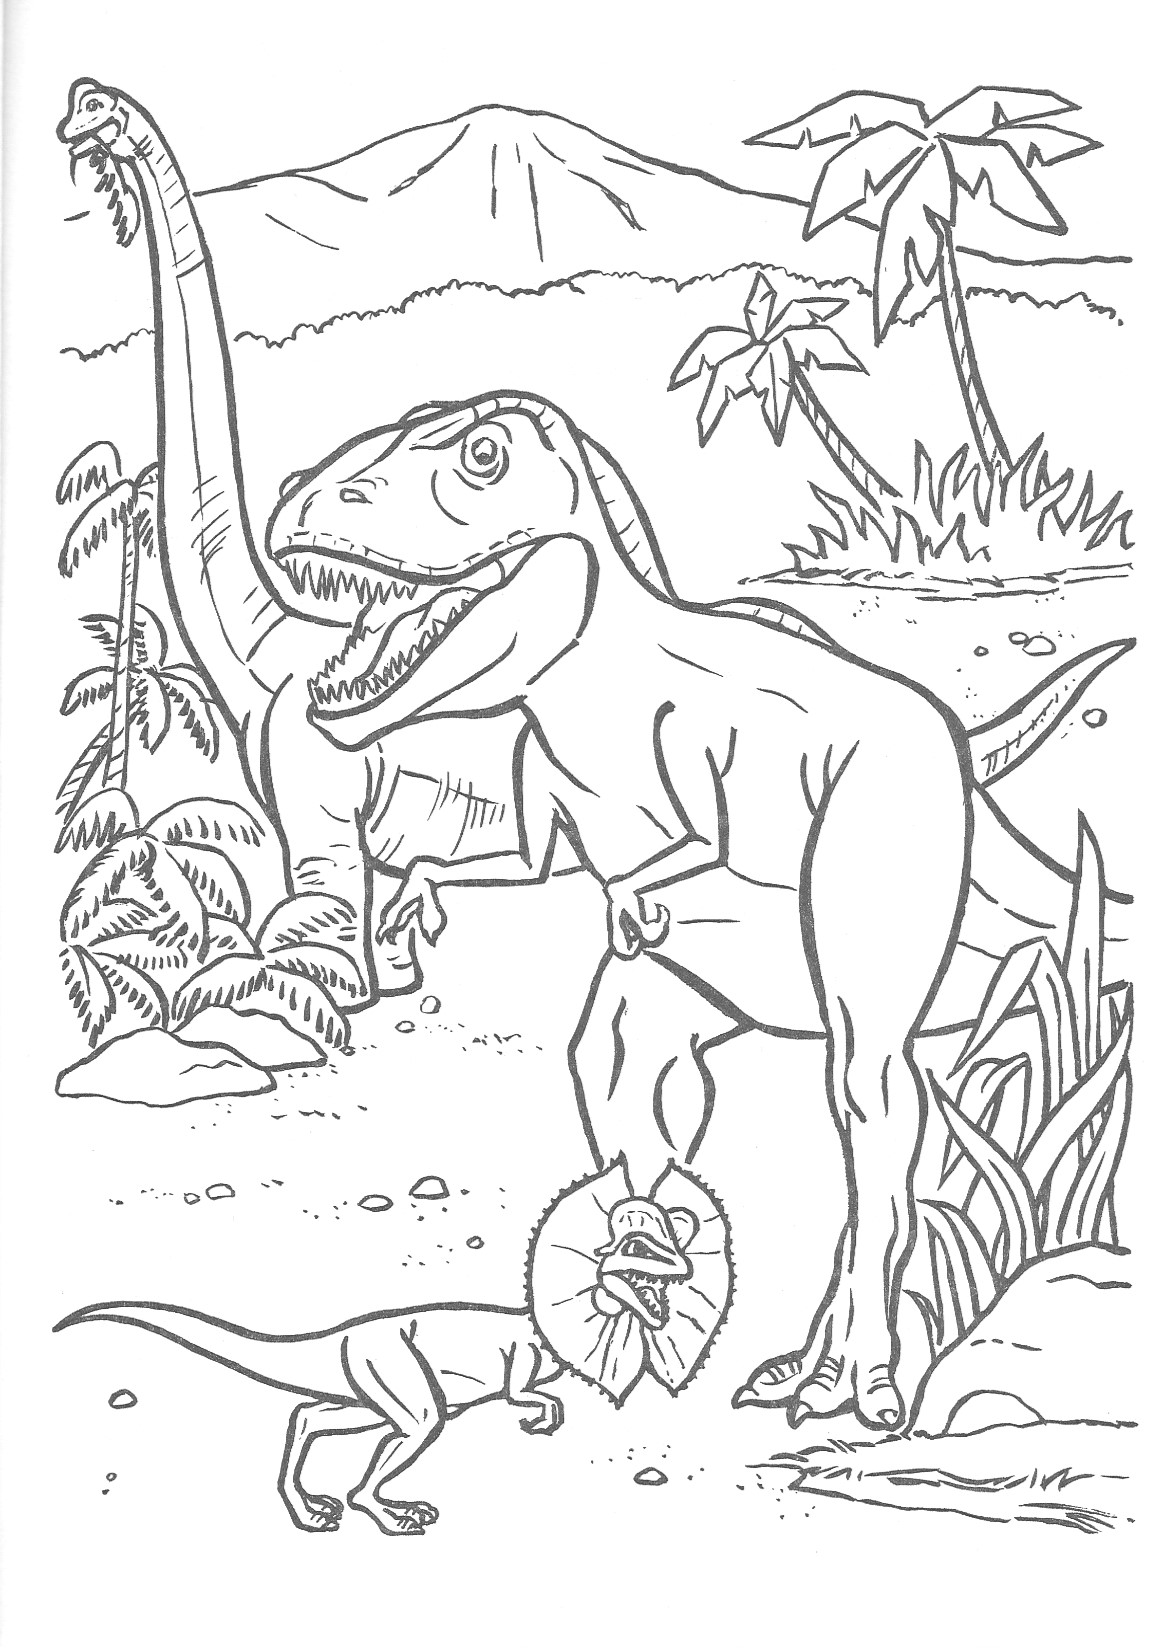 Jurassic Park official coloring page - Jurassic Park Photo (43330786) -  Fanpop